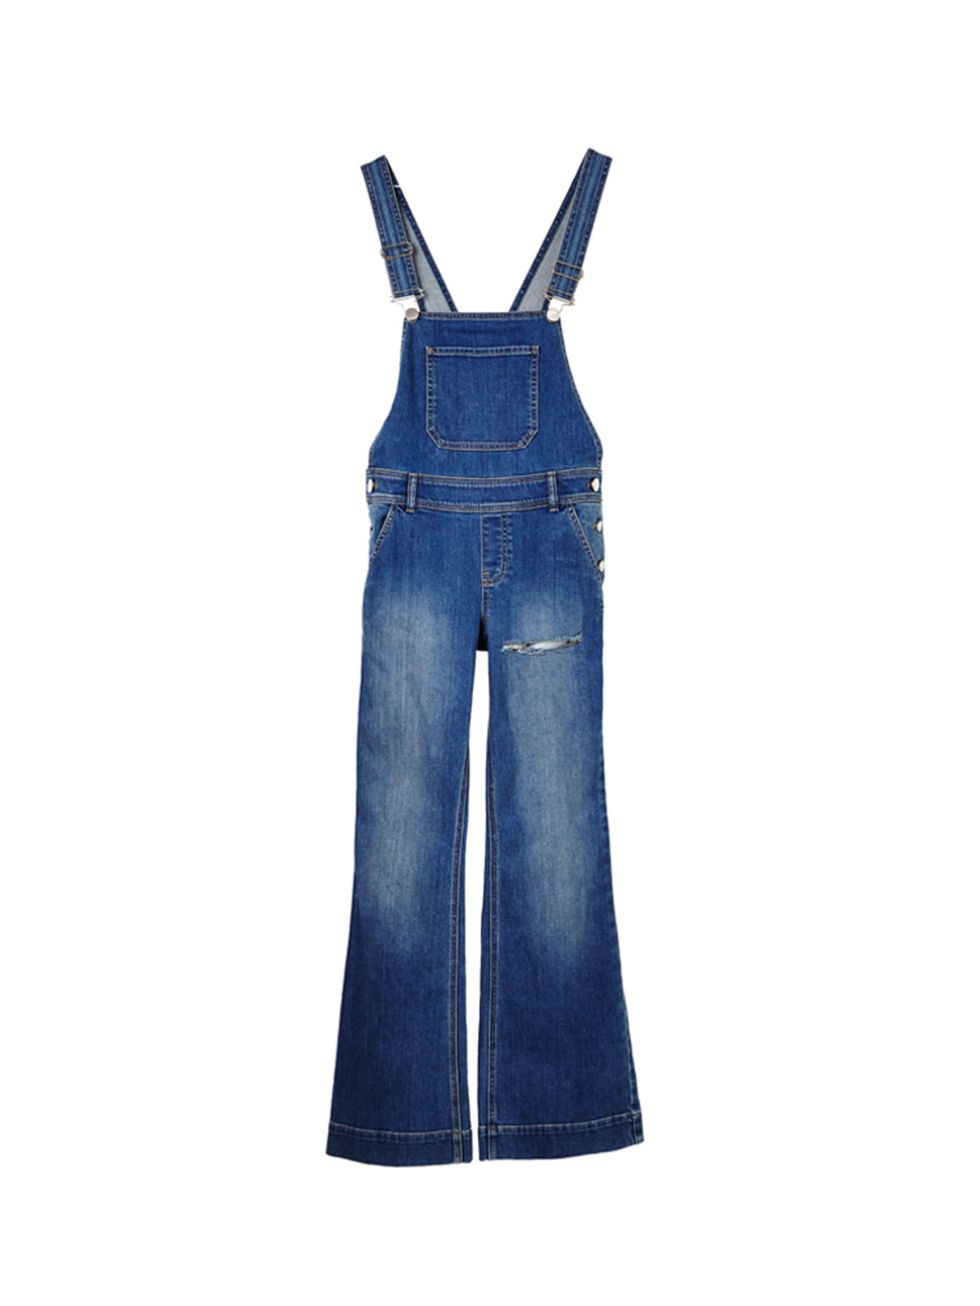 <p><a href="http://www.asos.com/asos/asos-denim-dungaree-flare-with-thigh-rip/prod/pgeproduct.aspx?iid=4810742&clr=Midstonewash&SearchQuery=asos+flared+dungarees&SearchRedirect=true" target="_blank">ASOS</a> dungarees, £45</p>